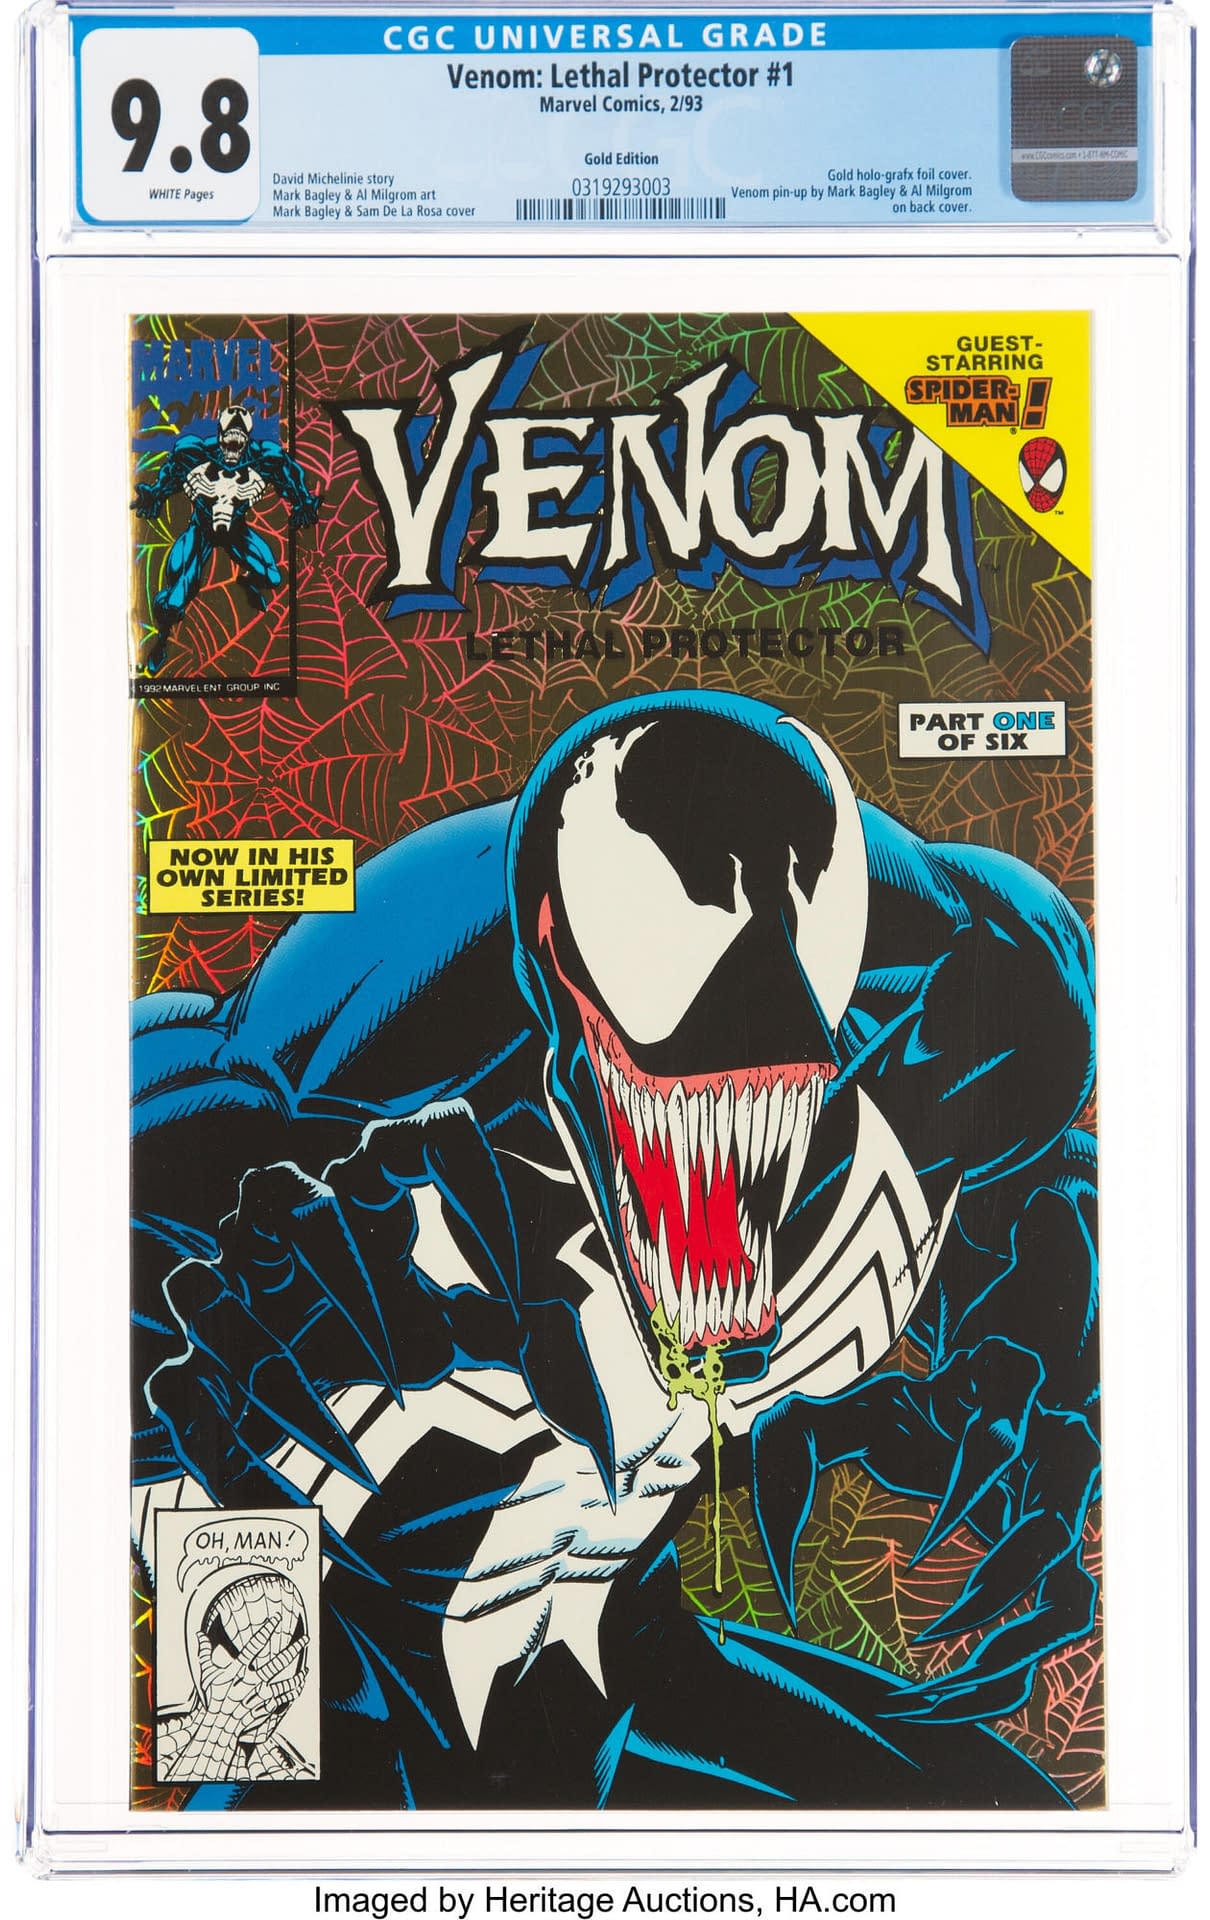 Venom Lethal Protector #1 Rare Gold CGC 9.8 On Auction At Heritage